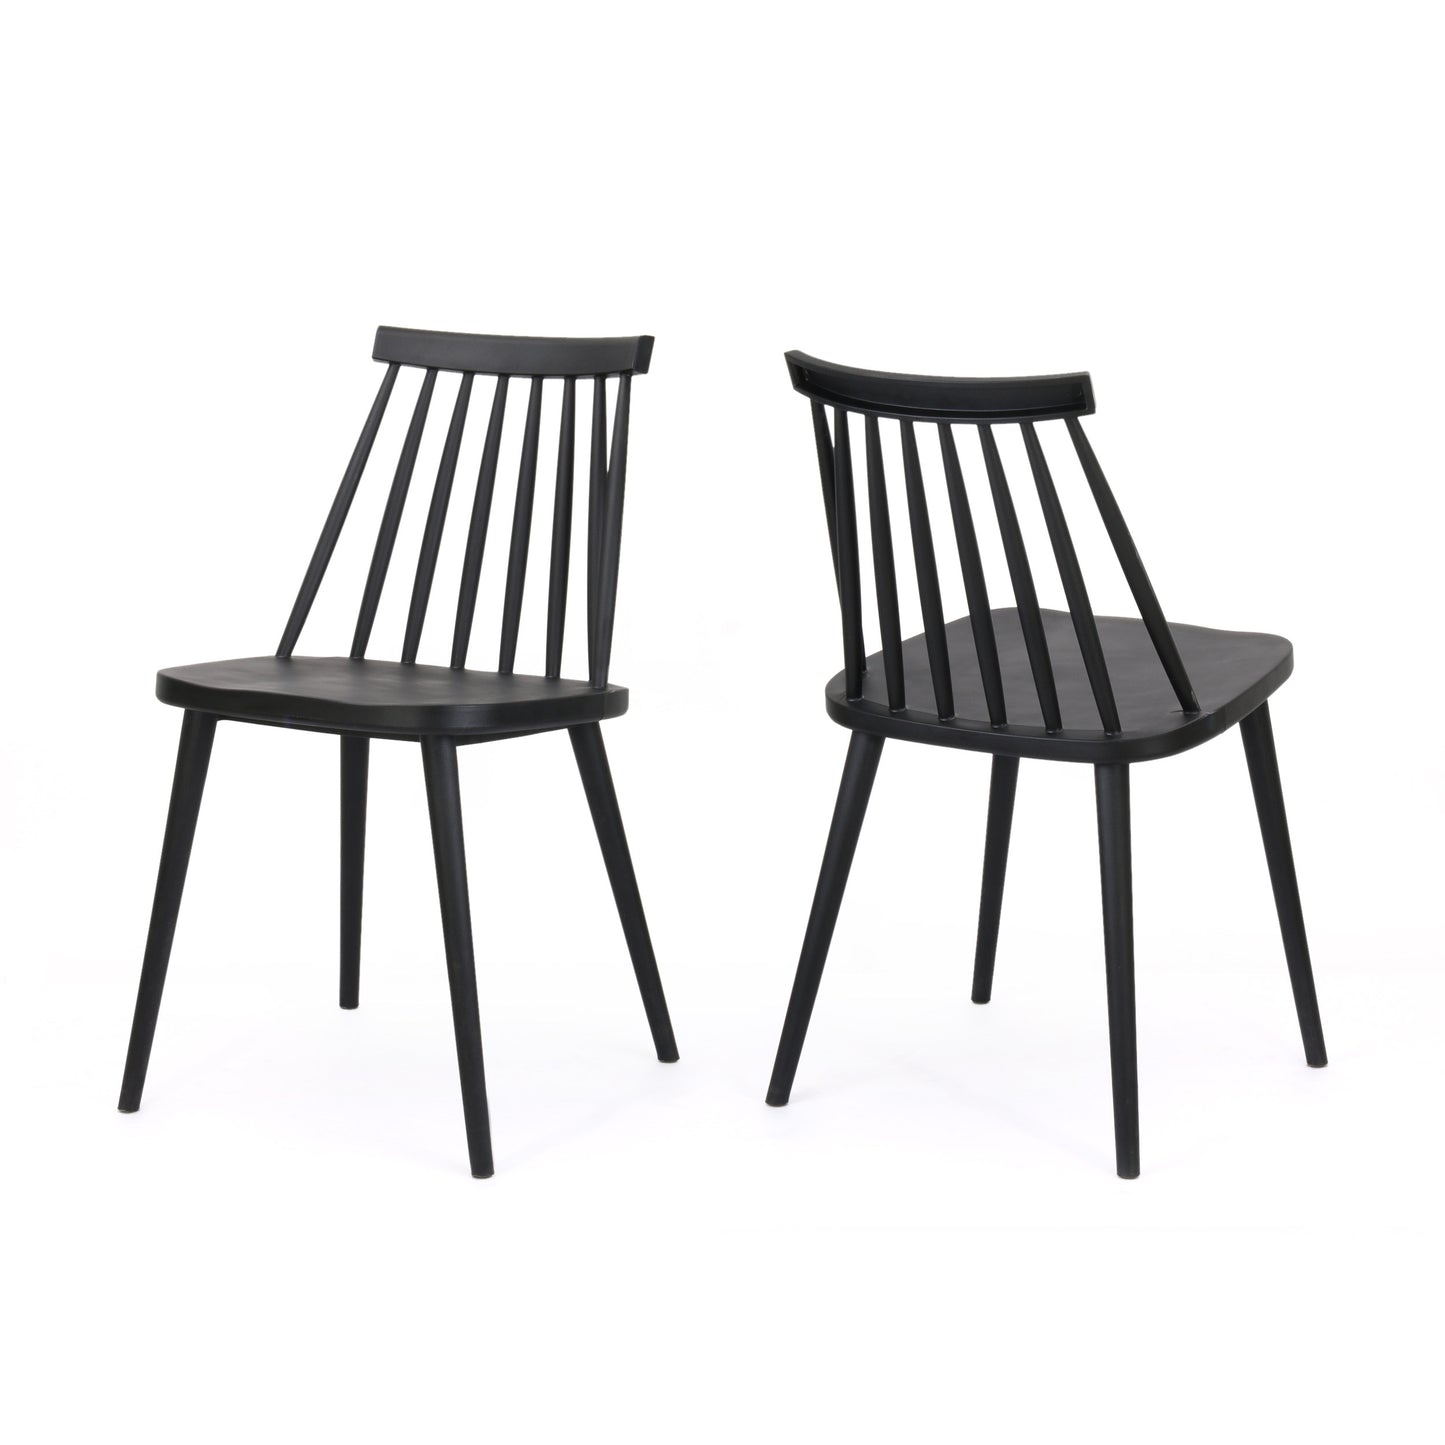 Phoebe Hume Farmhouse Spindle-Back Dining Chair (Set of 2)